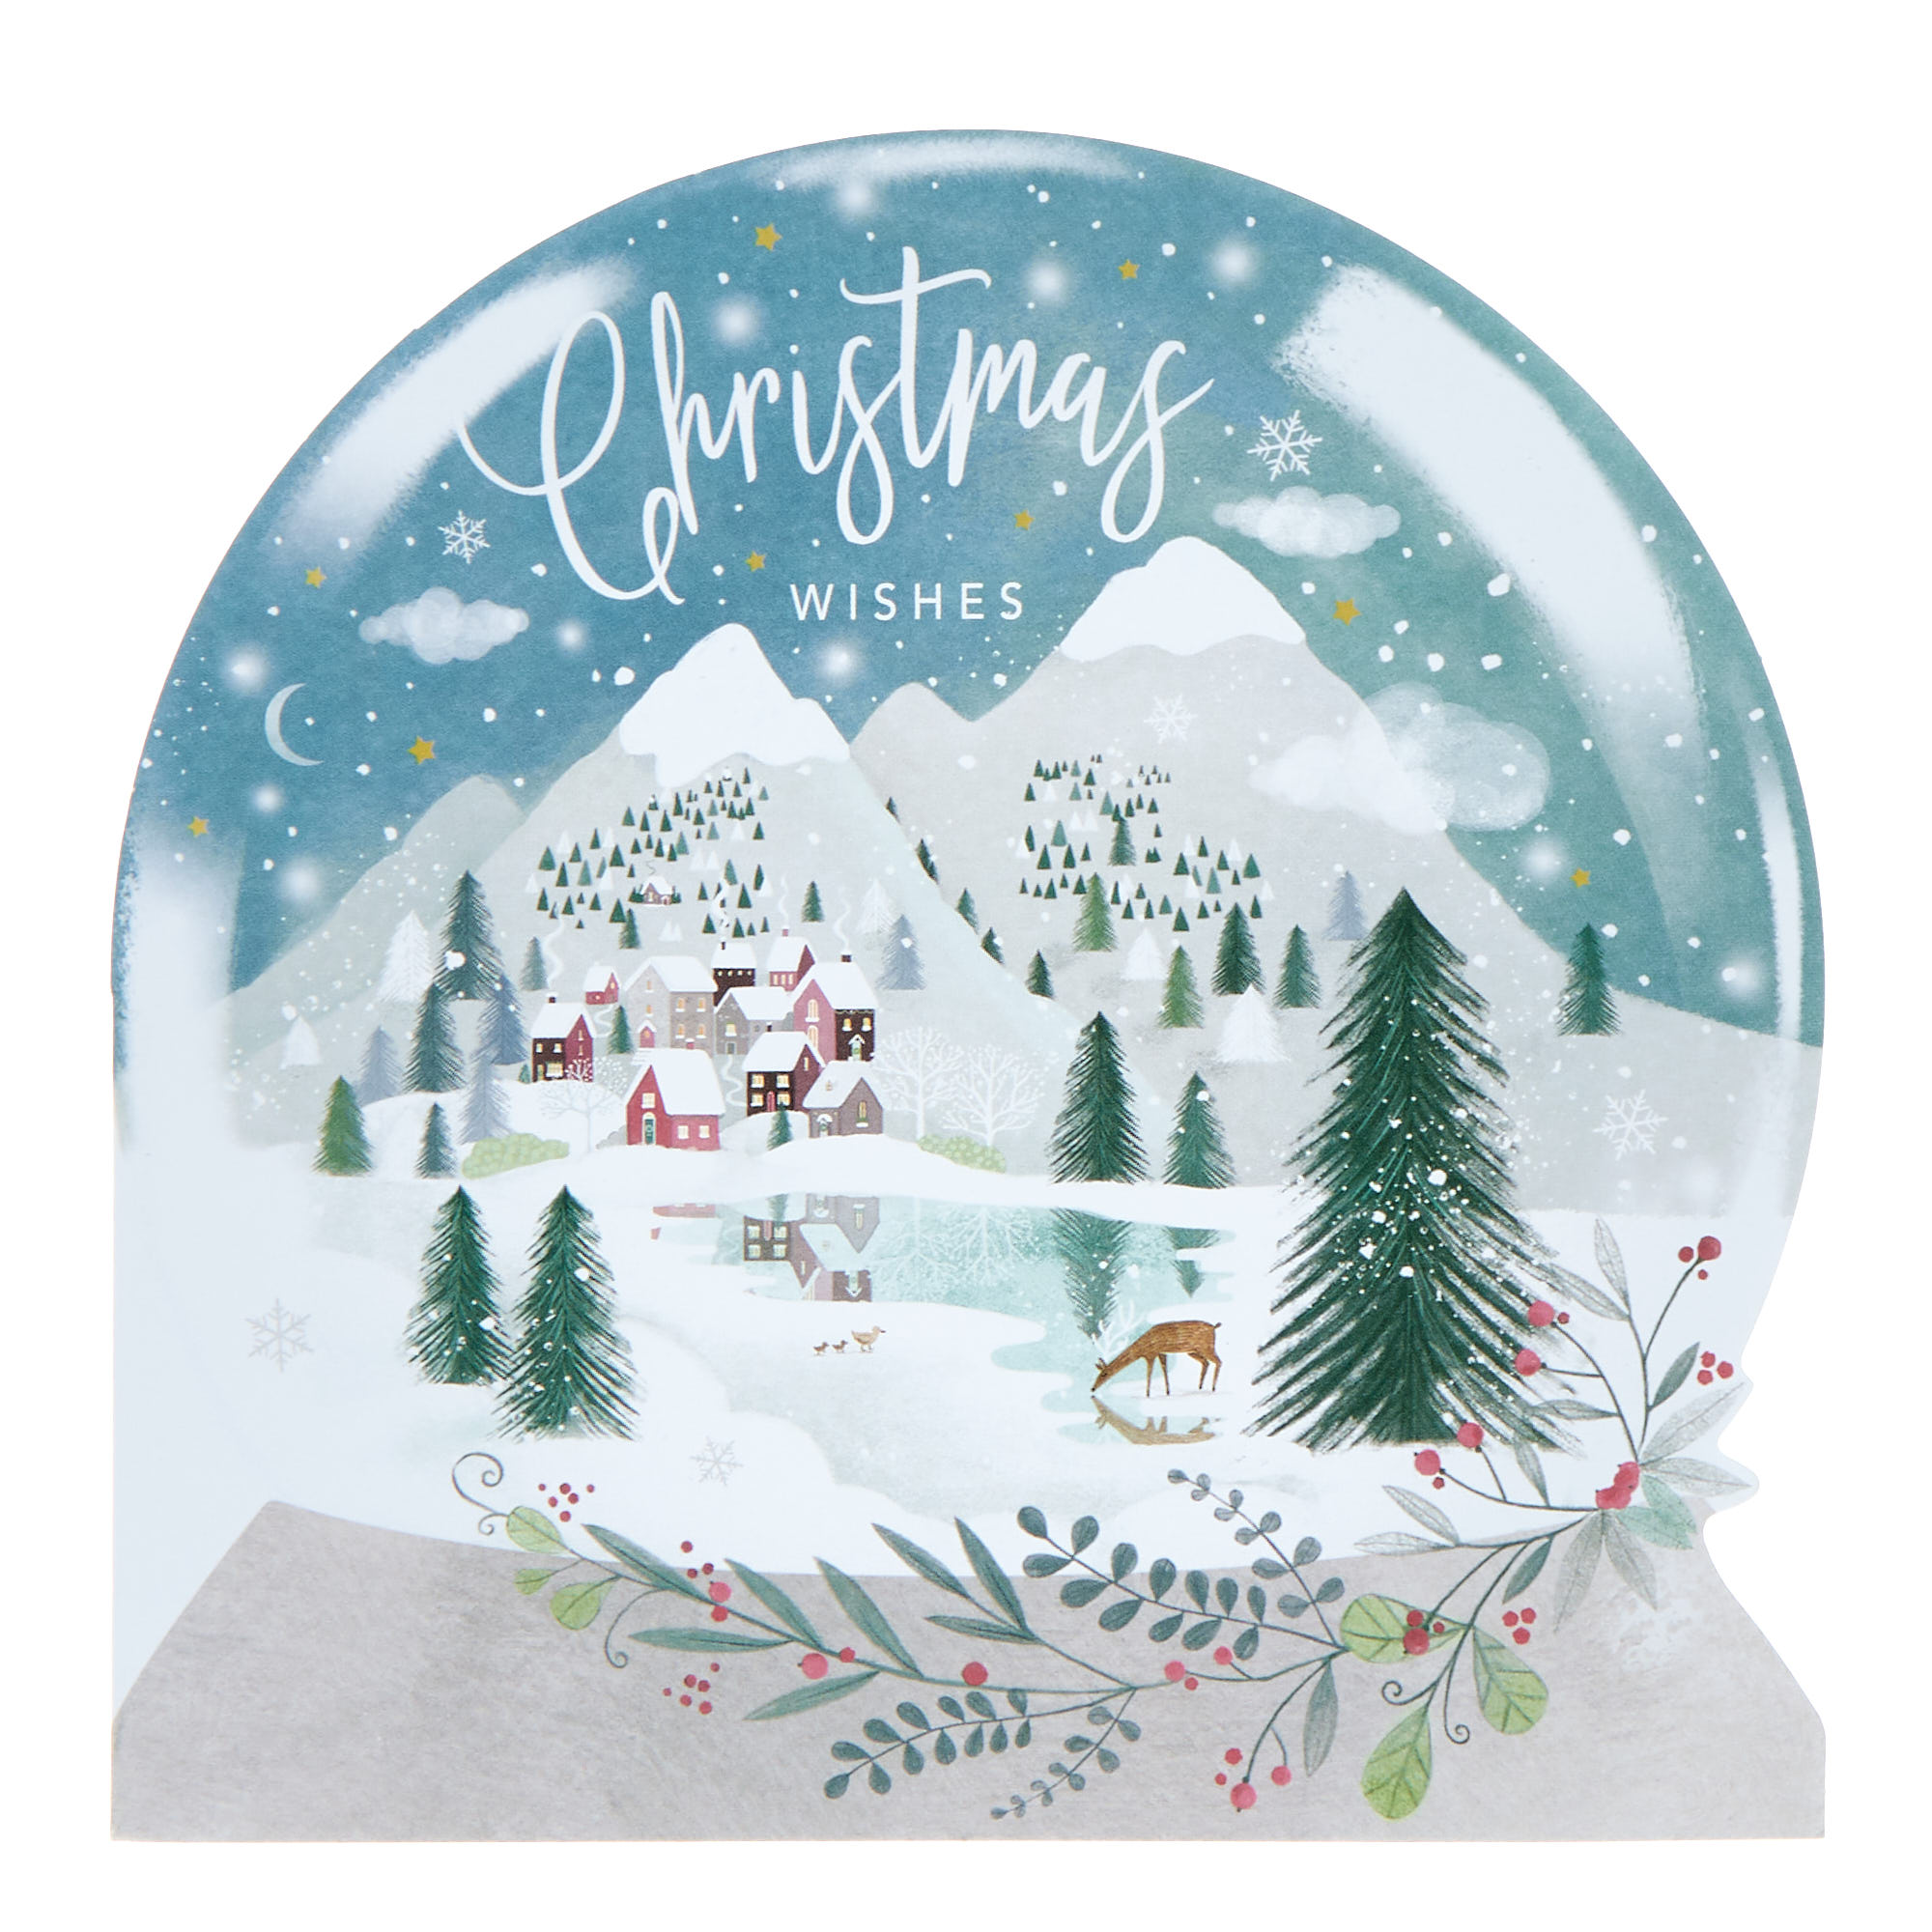 16 Charity Christmas Cards - Snow Globes (2 Designs)